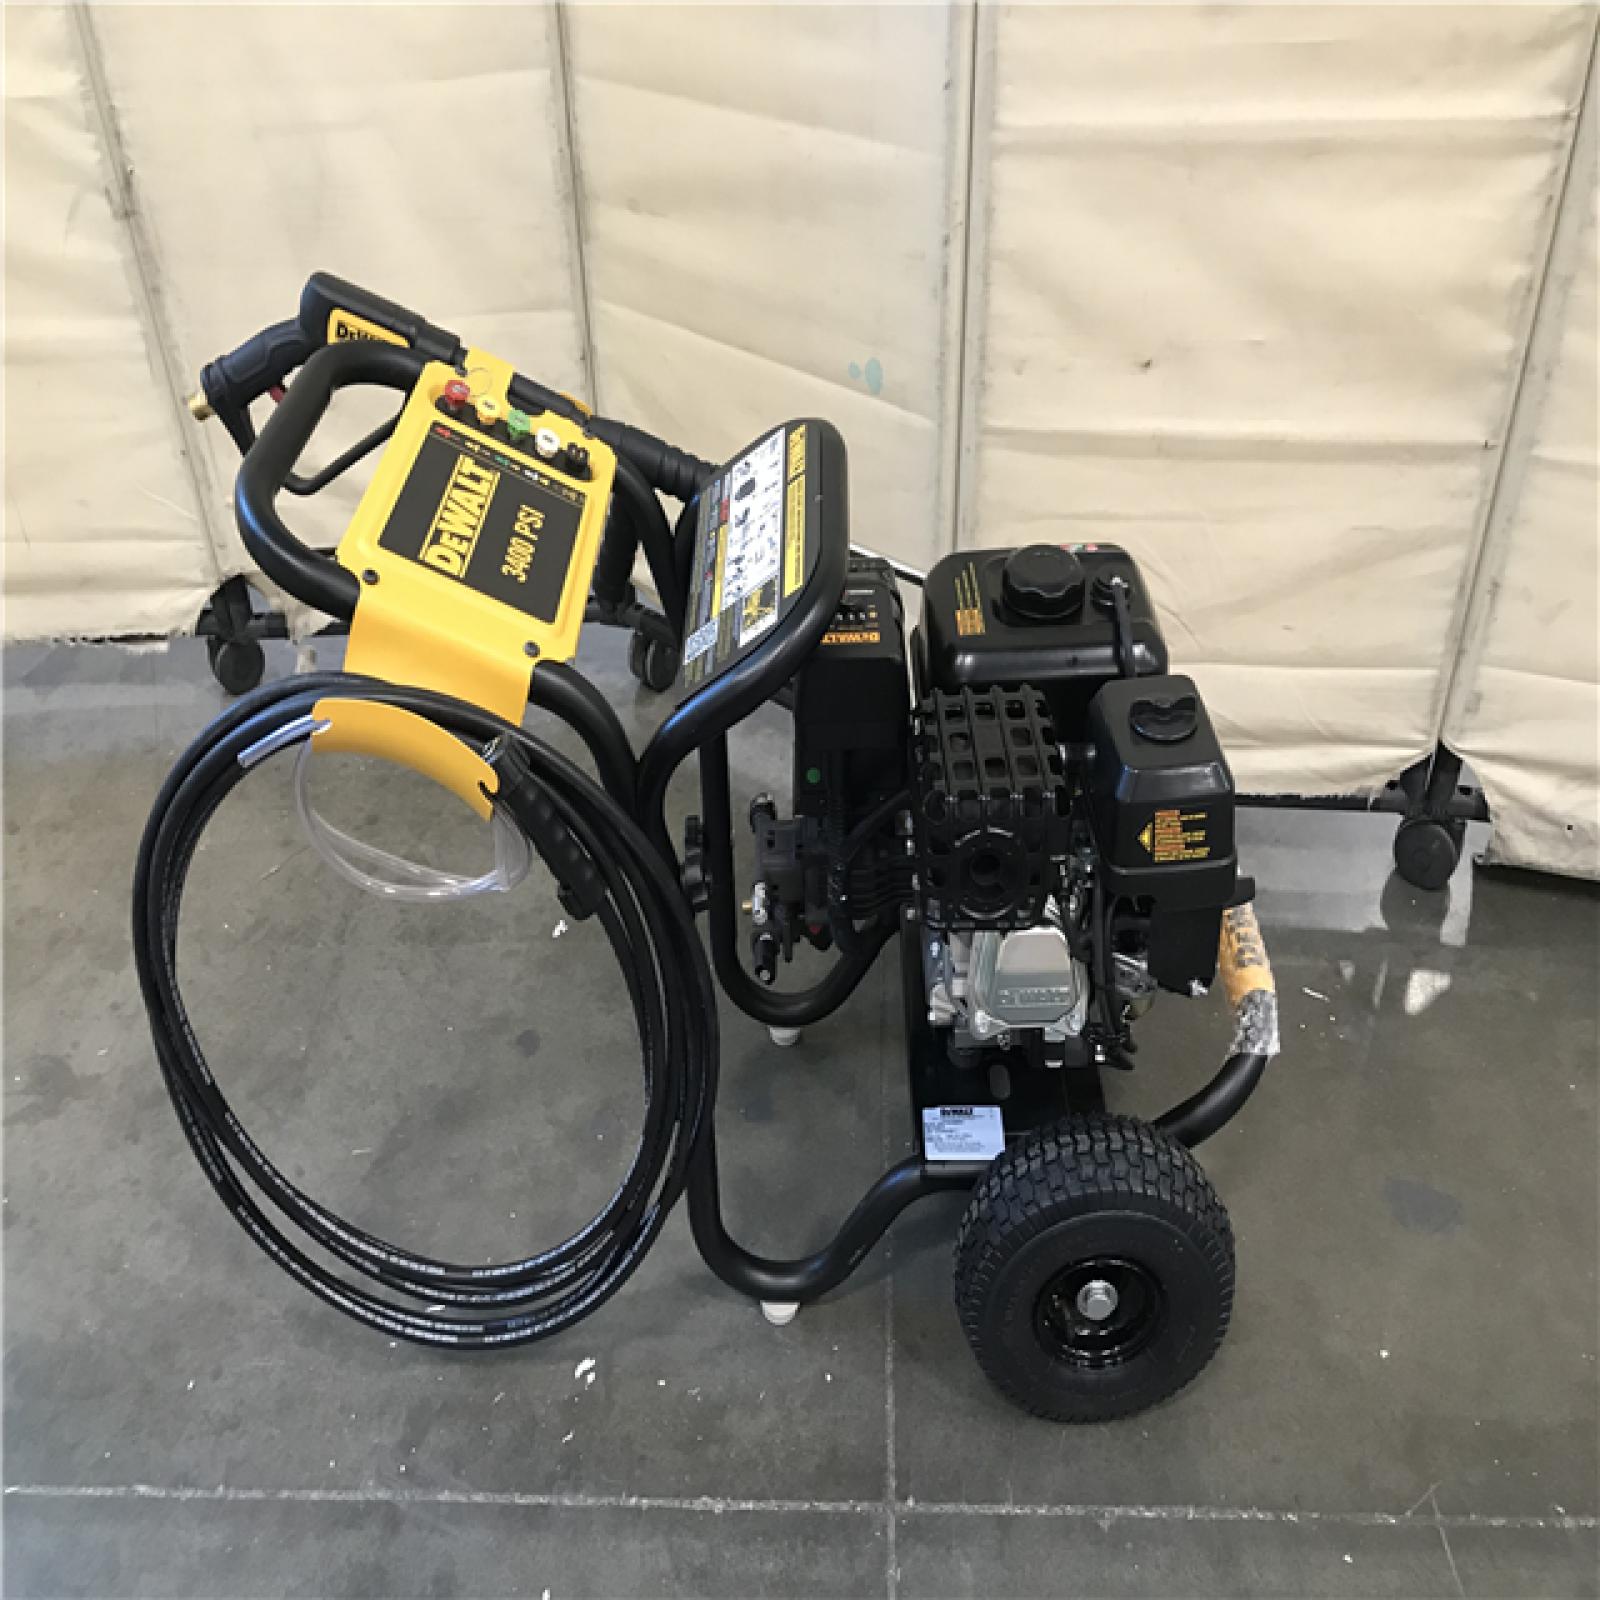 California NEW DEWALT DXPW3400PR 3400 PSI at 2.5 GPM Pressure Ready Cold Water Gas Powered Pressure Washer